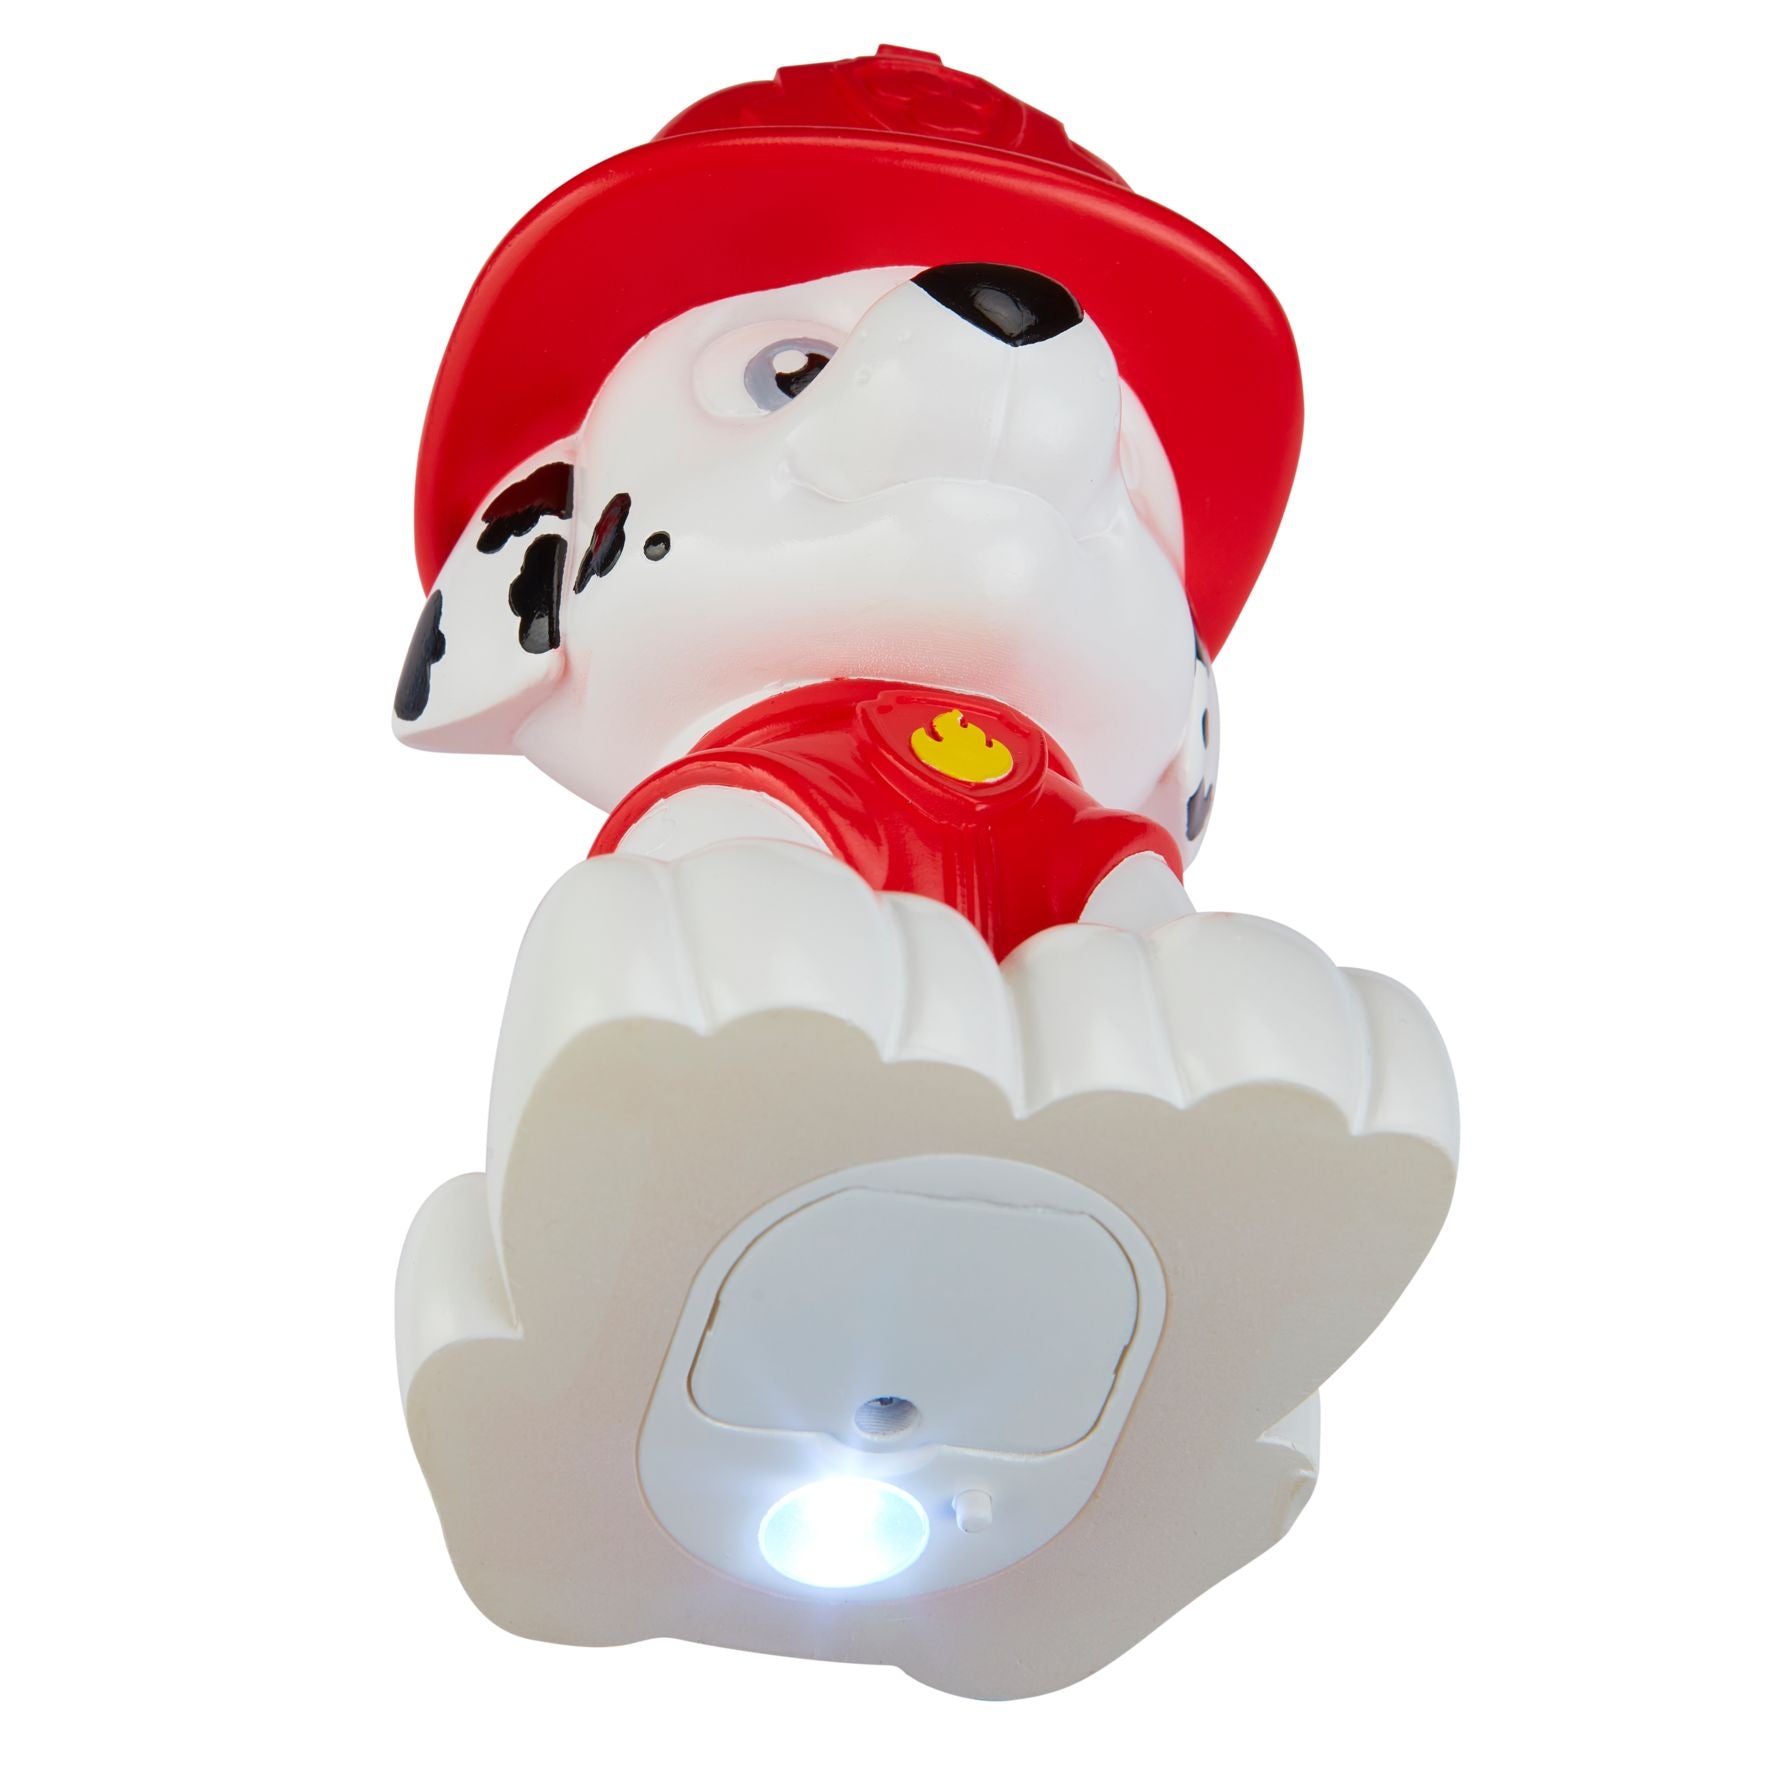 Paw Patrol Marshall 2-in-1 Bedside Night Light And Torch Buddy